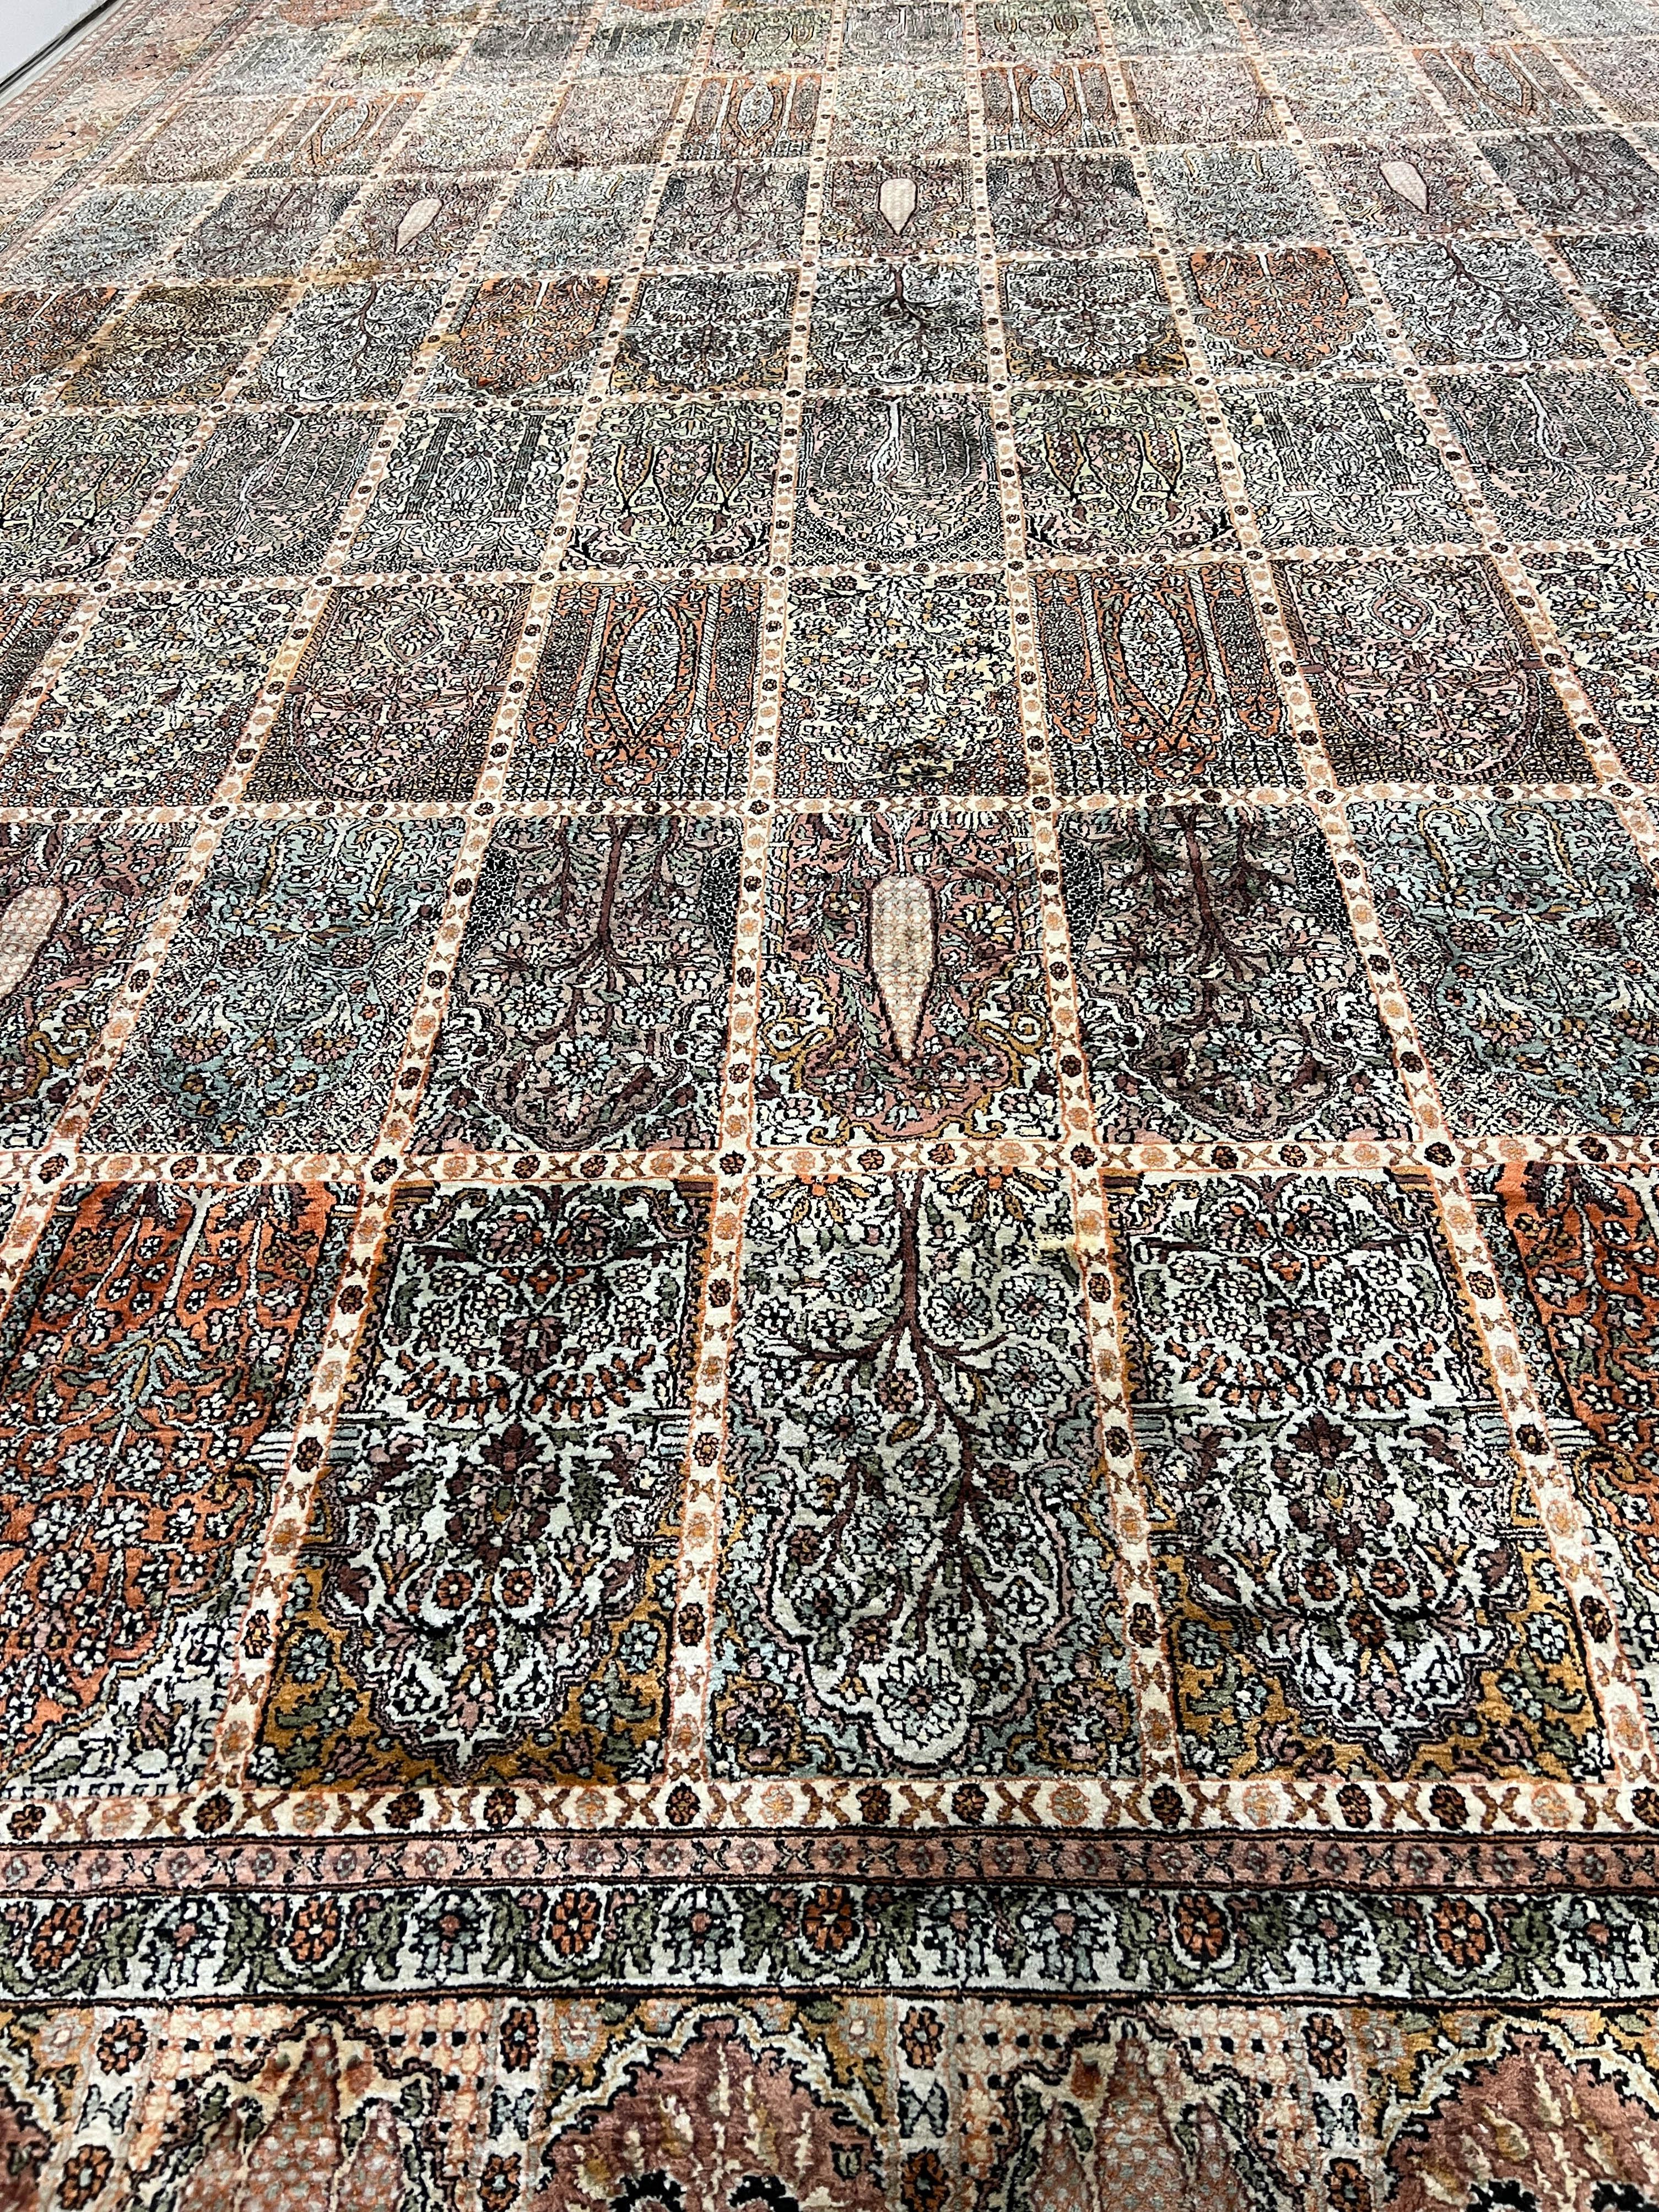 Hand-Knotted Kashmir Silk Pile Rug - 12' x 18' For Sale 1